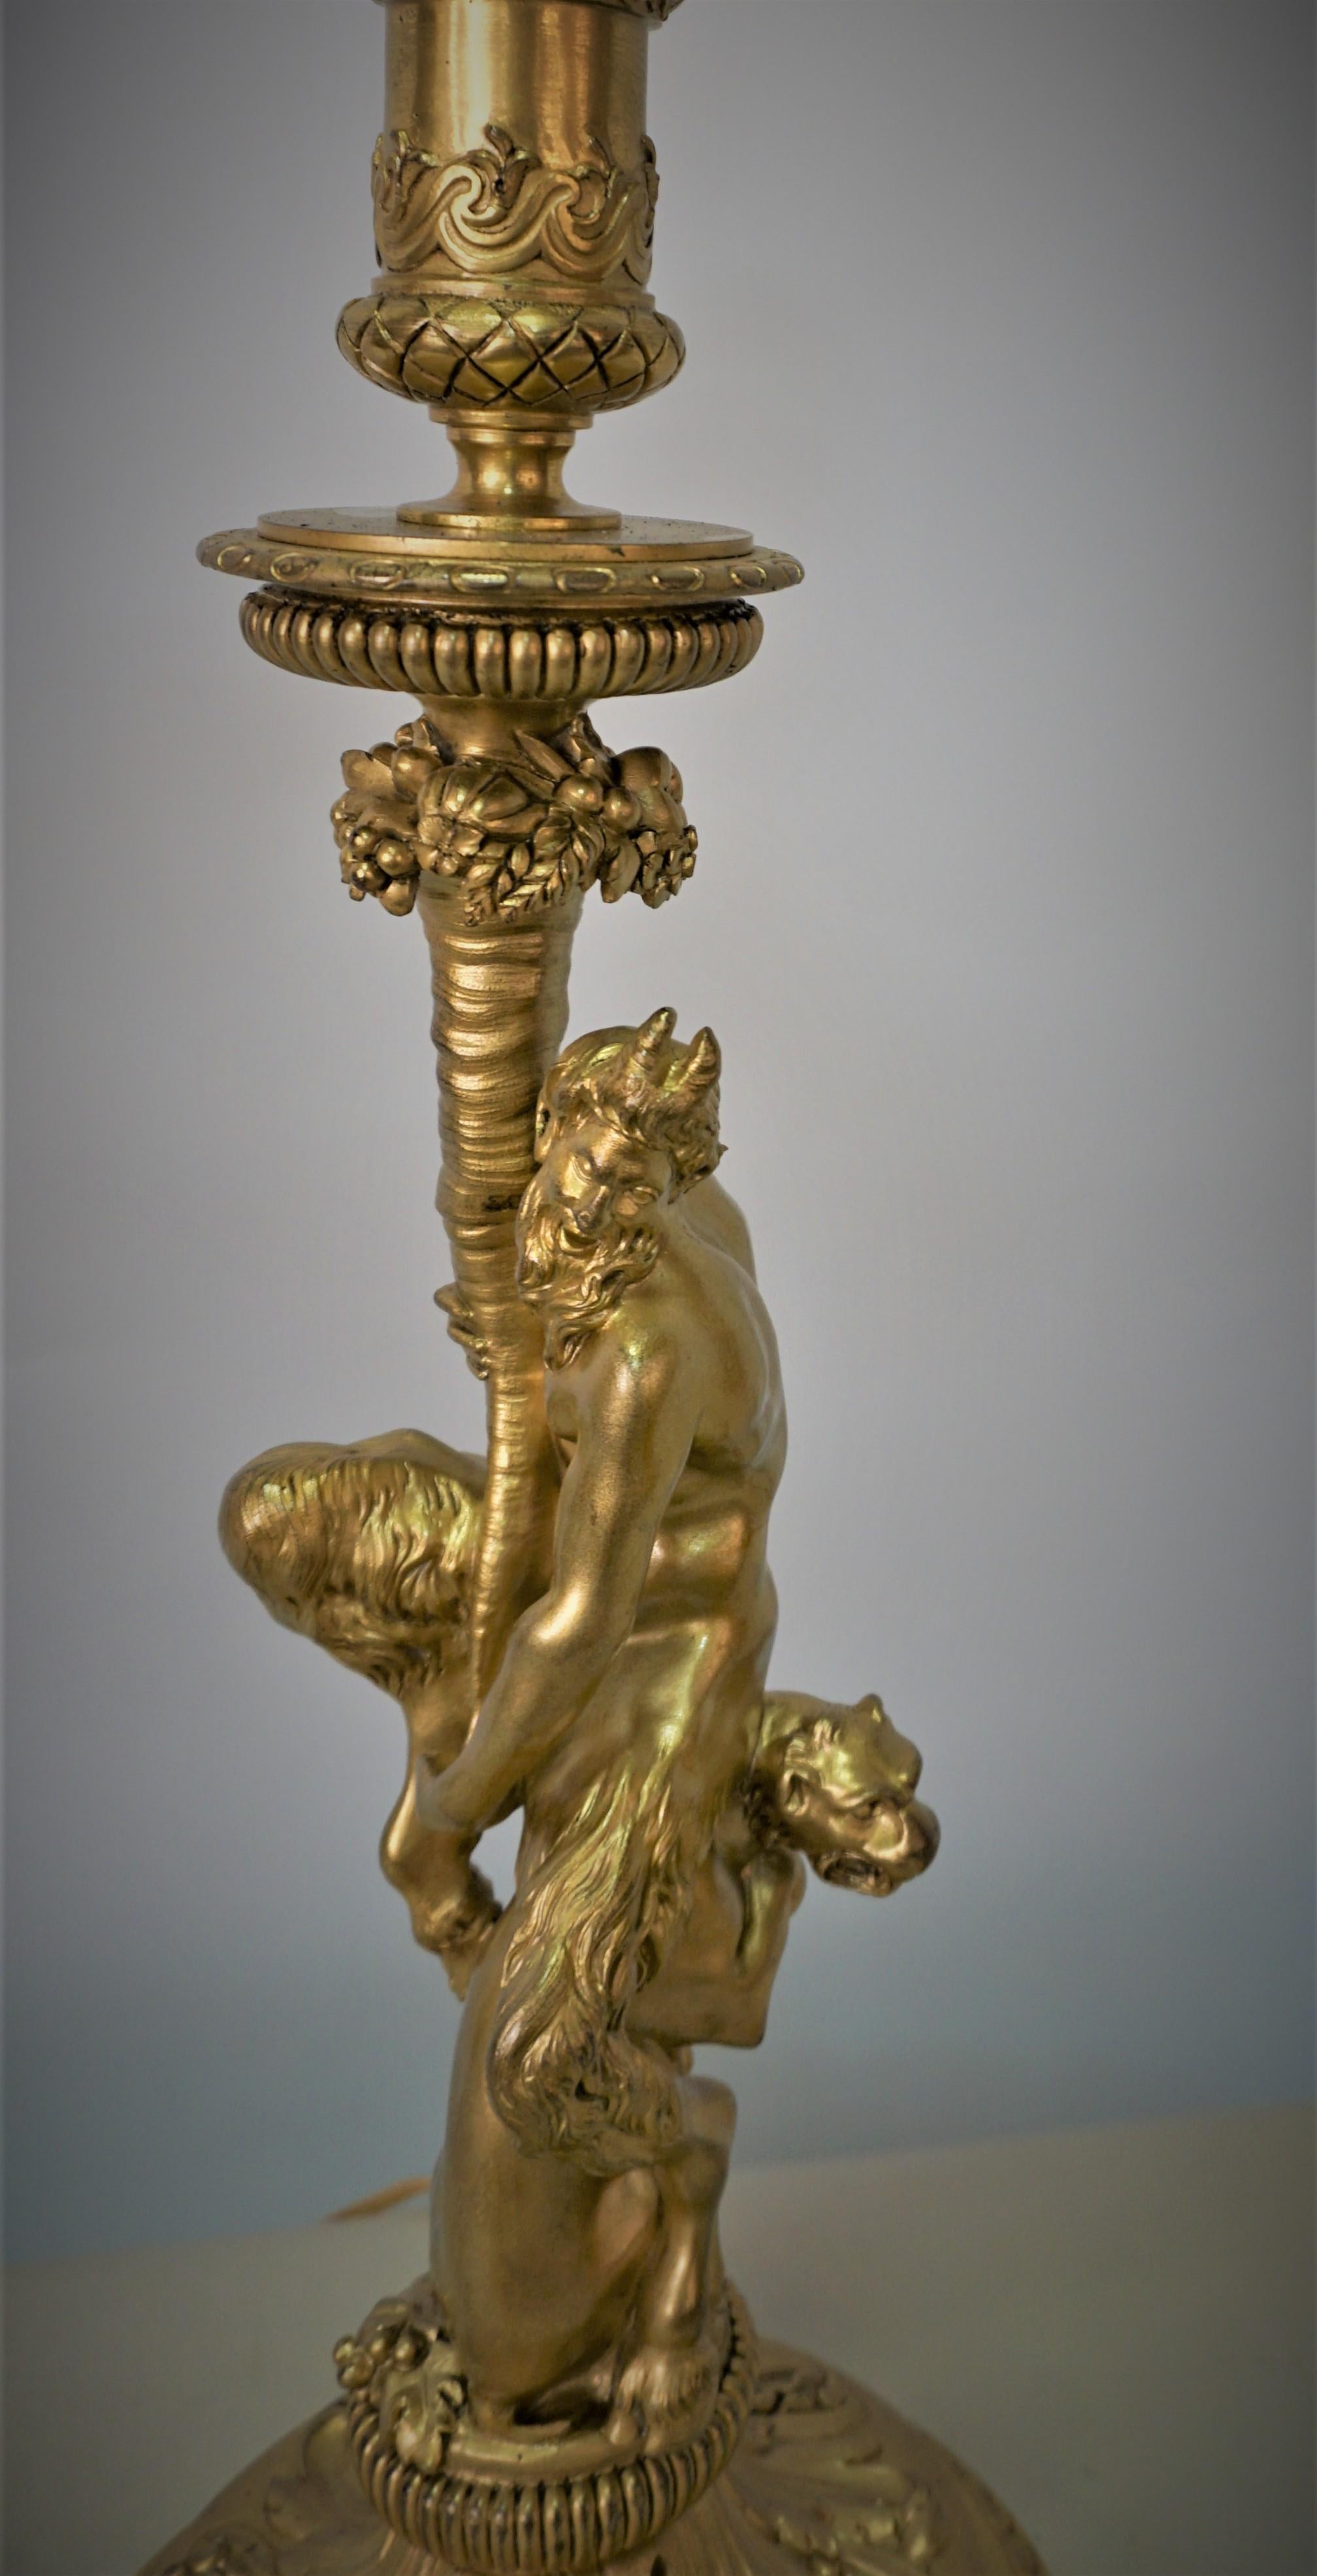 French 19th Century Gilt Bronze Candlestick Lamp After Corneille Van Cleve